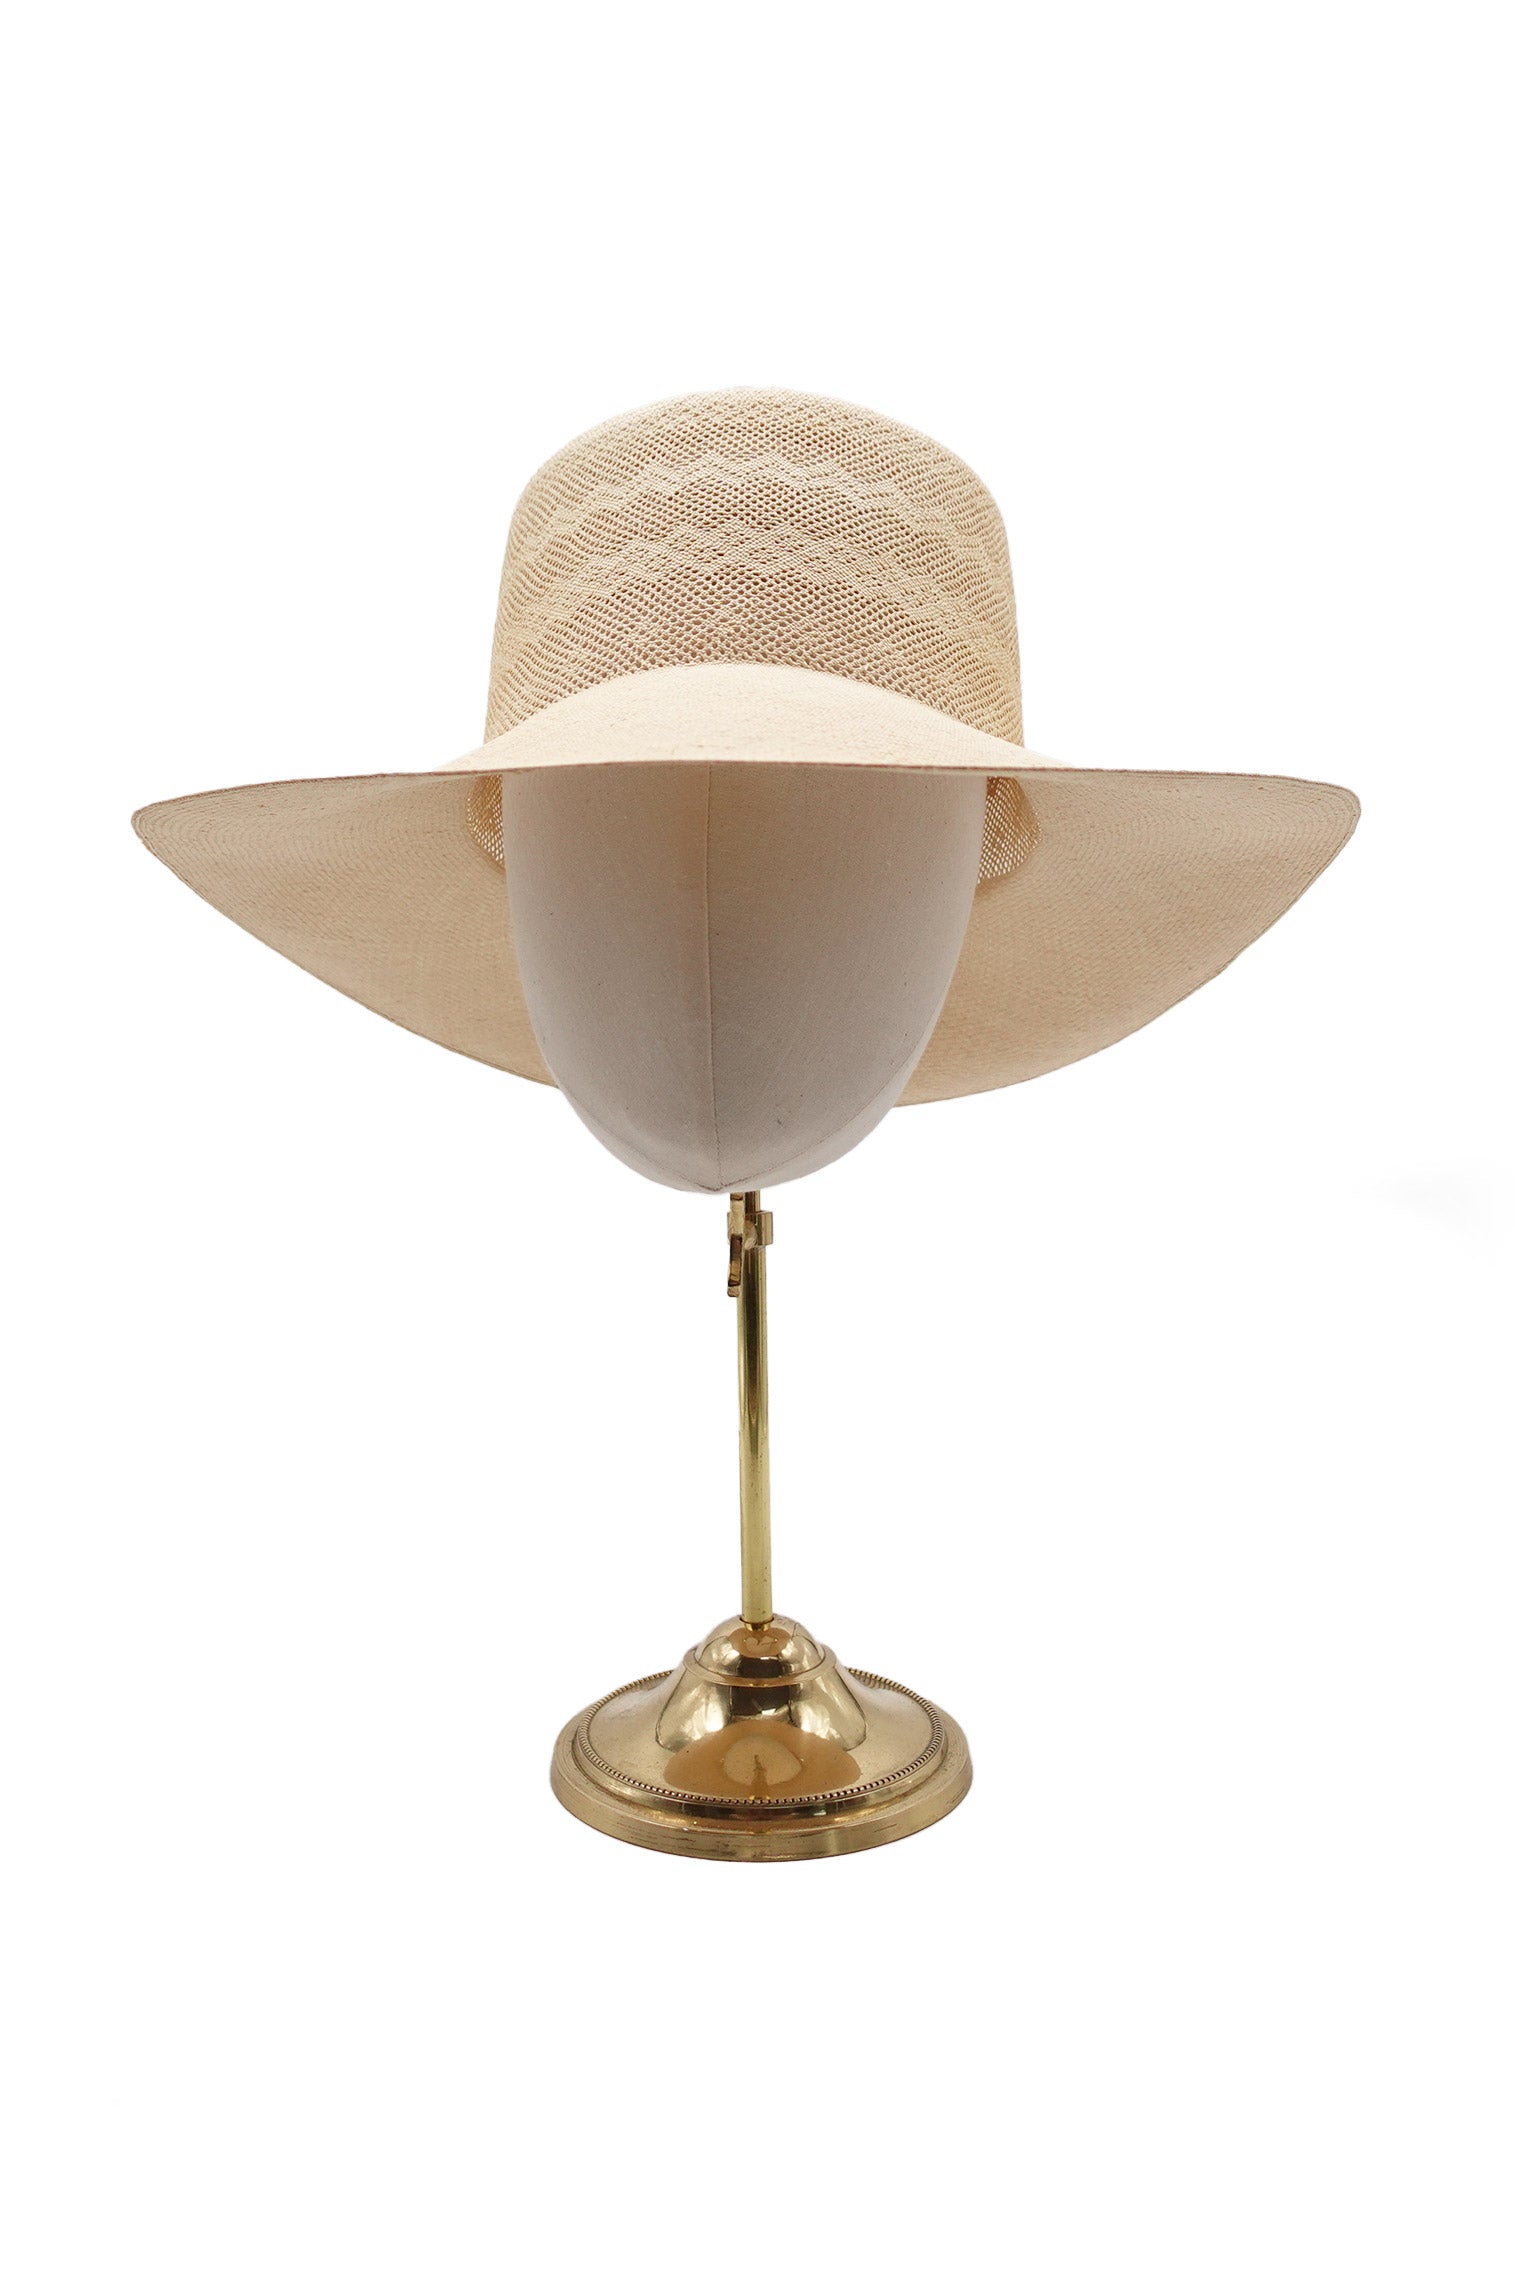 Alice Woven Panama - The Bespoke Embroidered Panama Hat Collection - Lock & Co. Hatters London UK